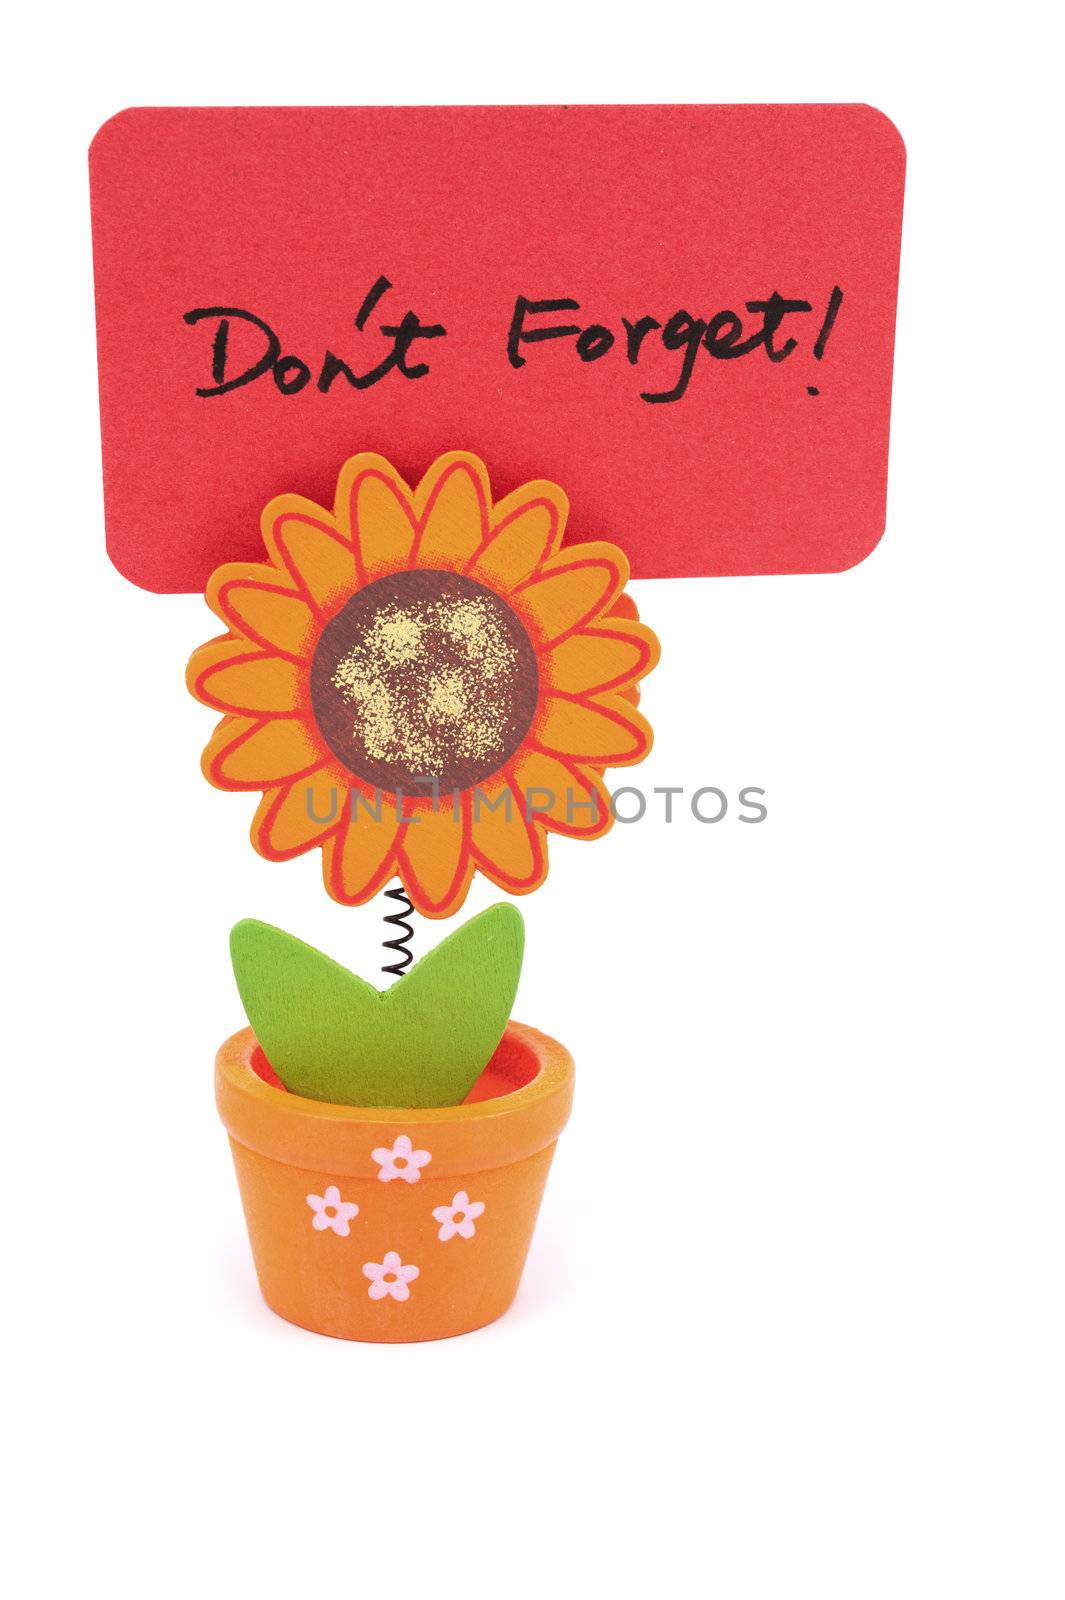 Don't forget words written on red paper of sun flower pot clip